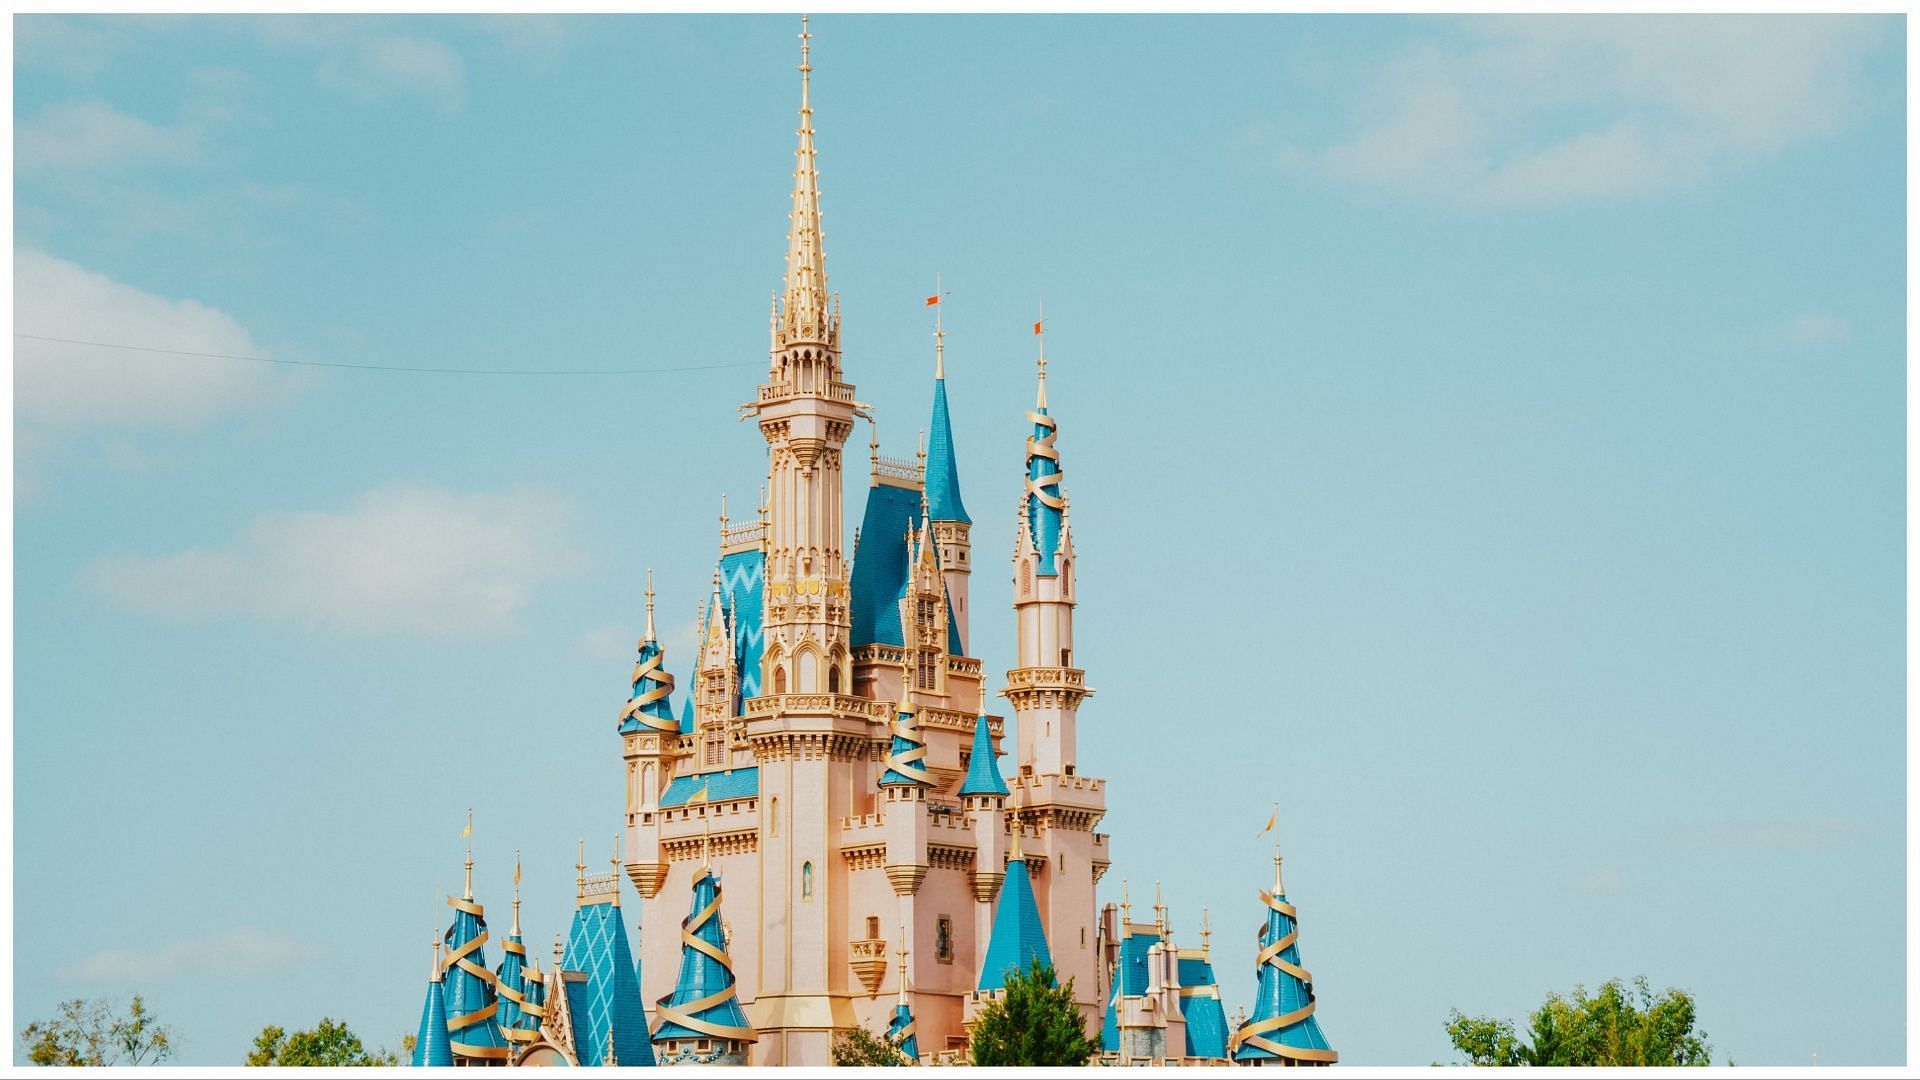 A 39-year-old man fell to his death in Disney World (Photo by Nicholas Fuentes on Unsplash)